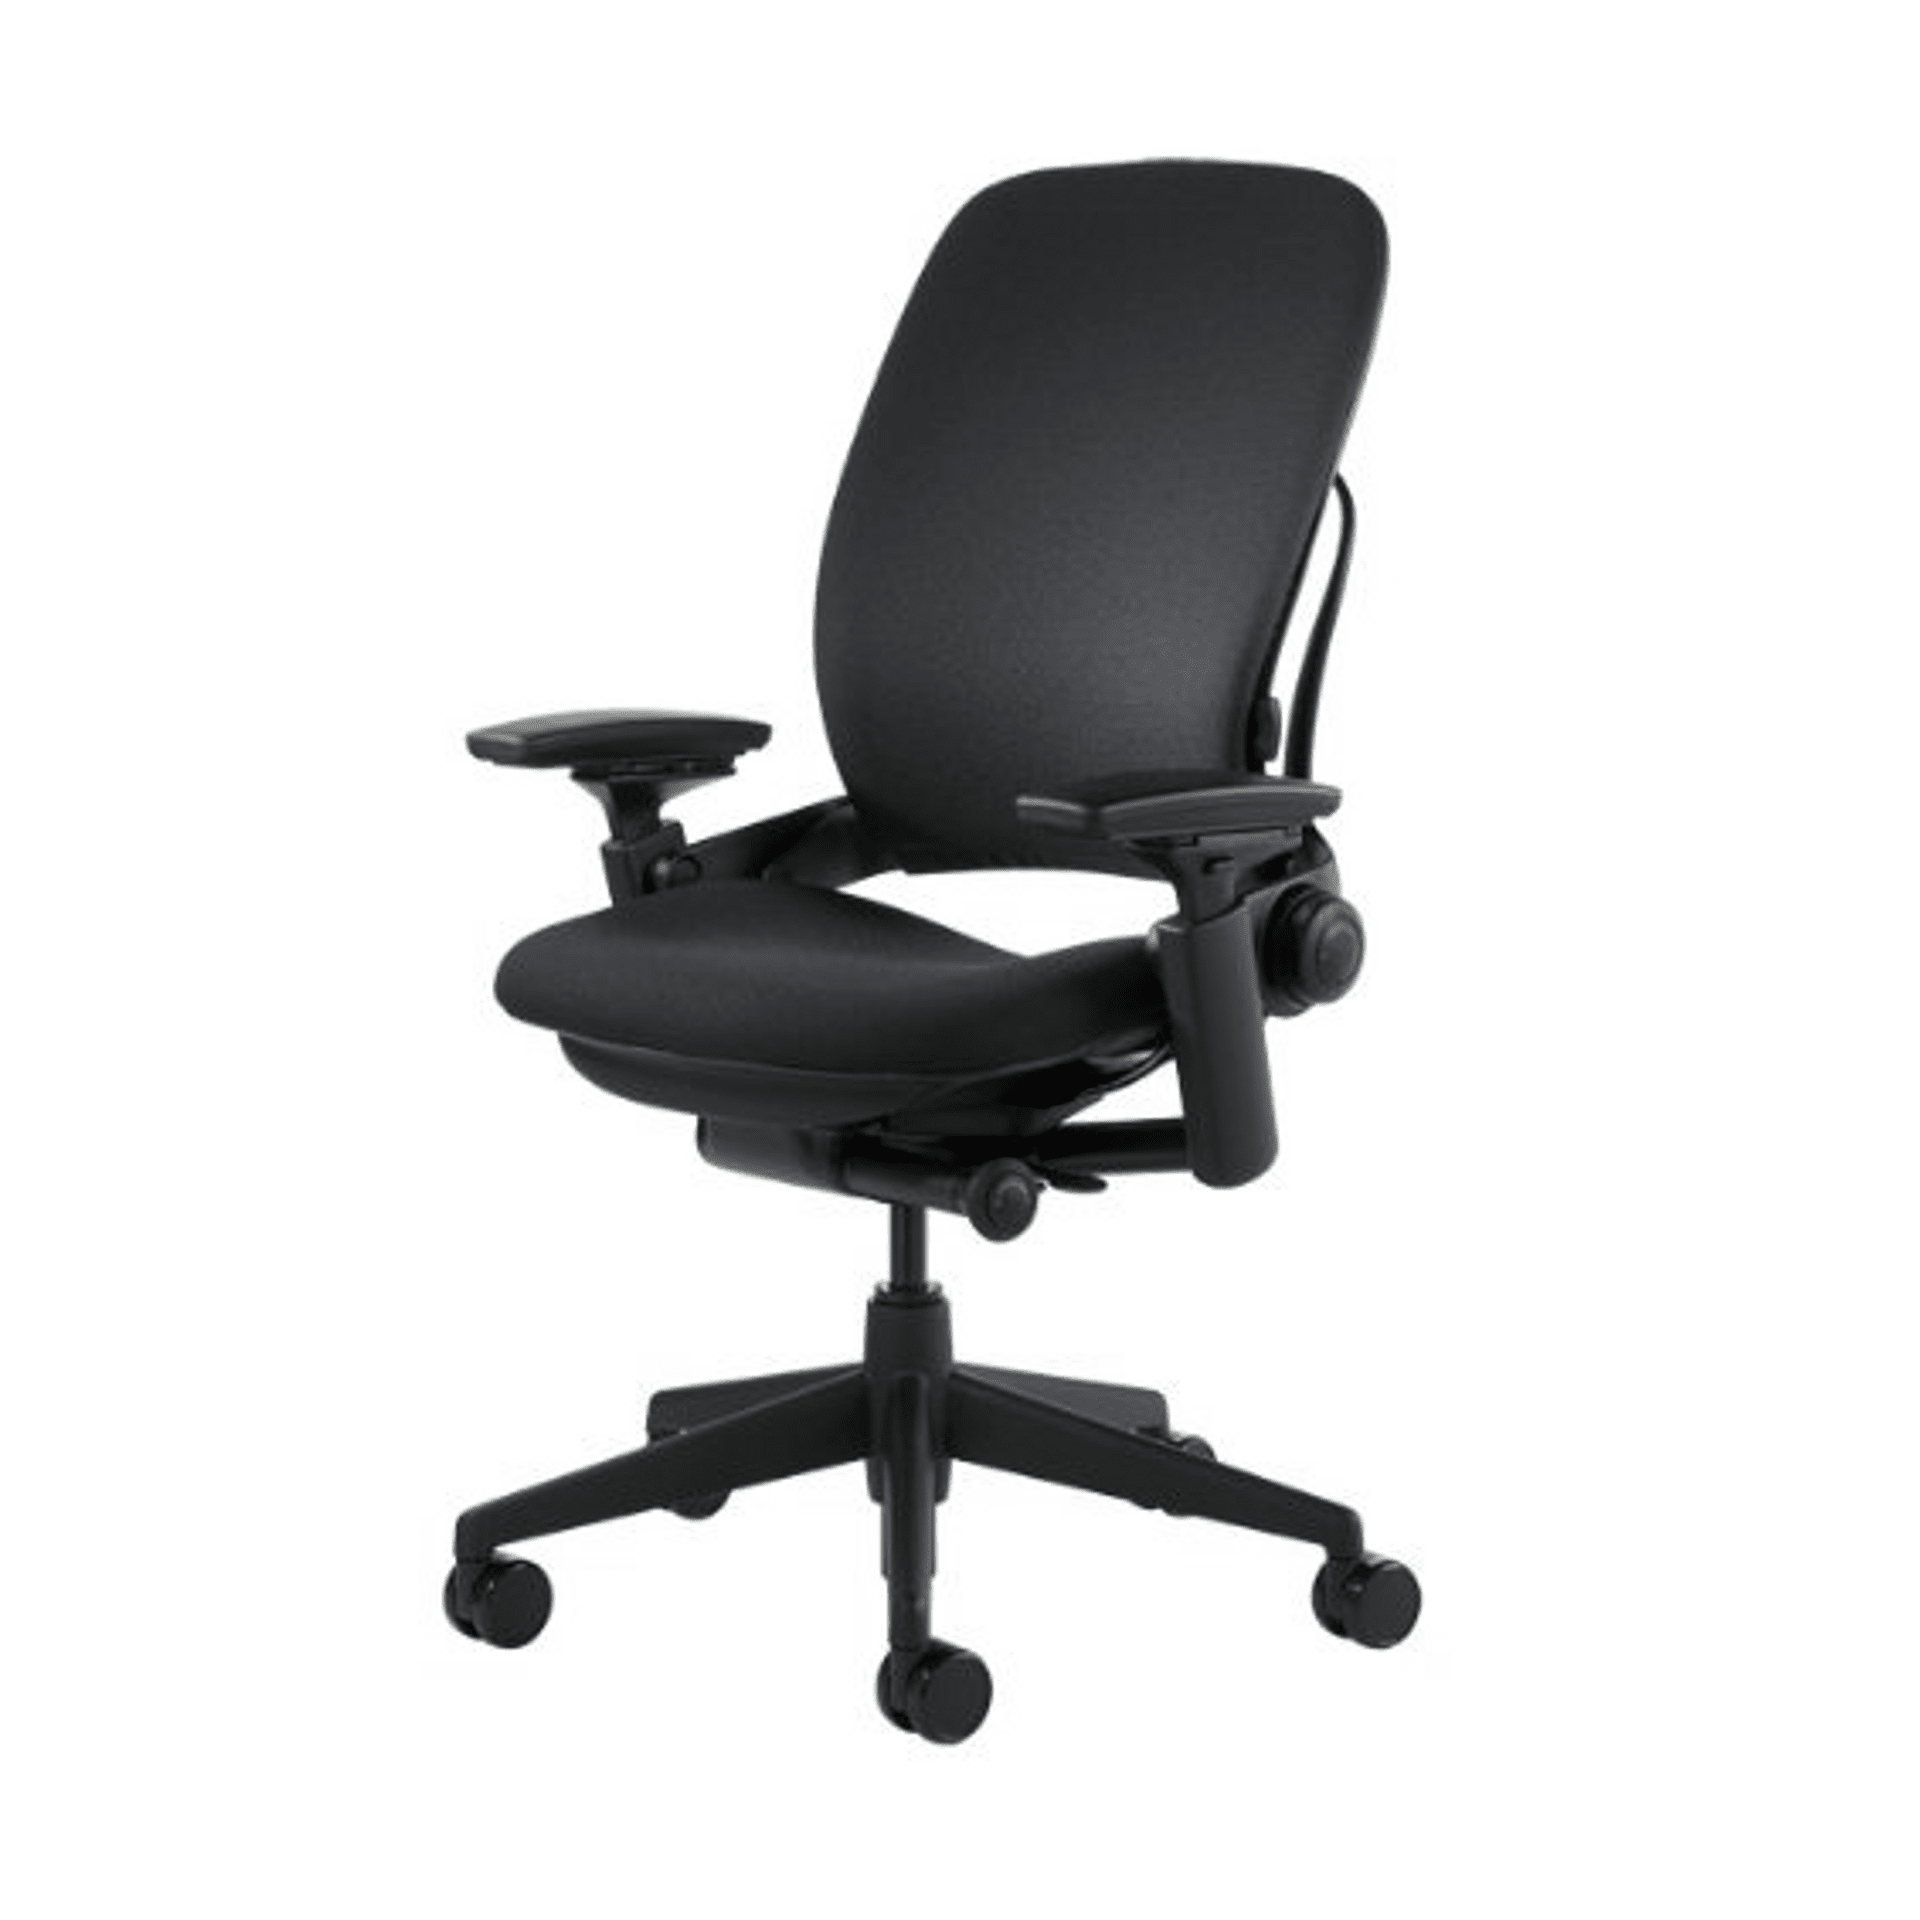 Steelcase Leap chair V2 | Black | Fabric Fully Adjustable Tilt Tension 4  Way Adjustable Arms